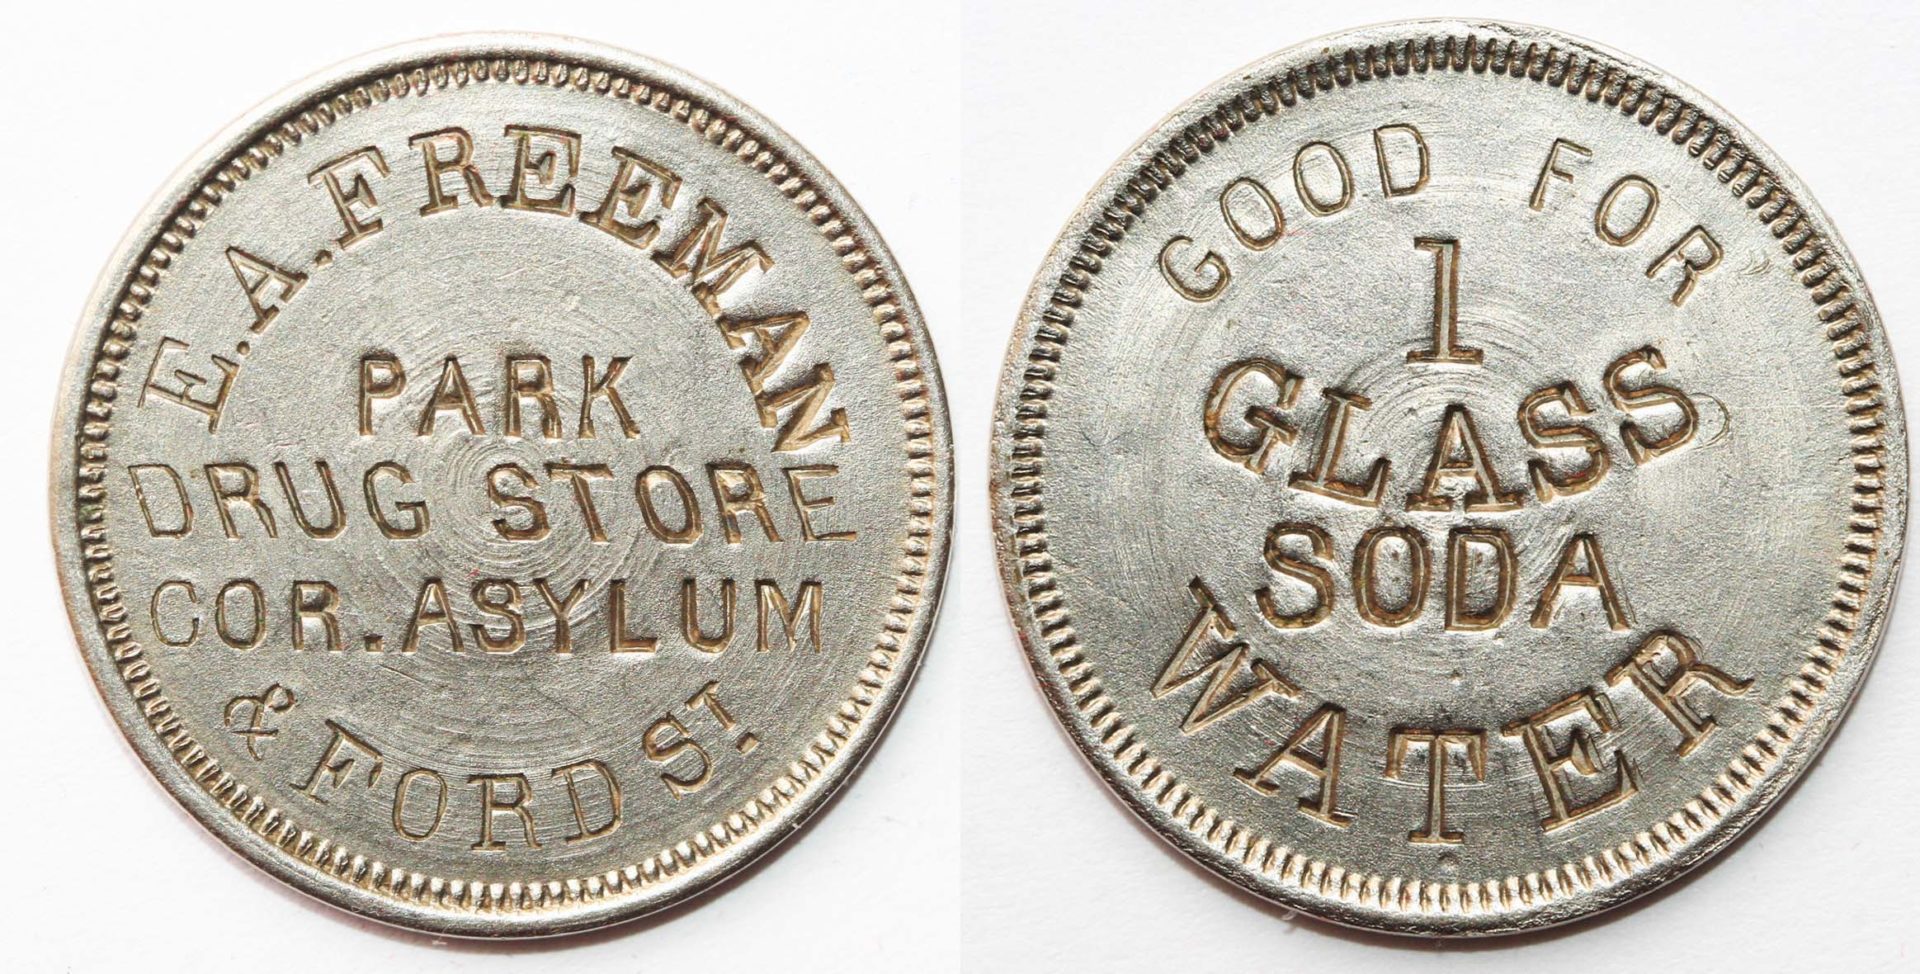 Freeman's trade tokens for his drug store